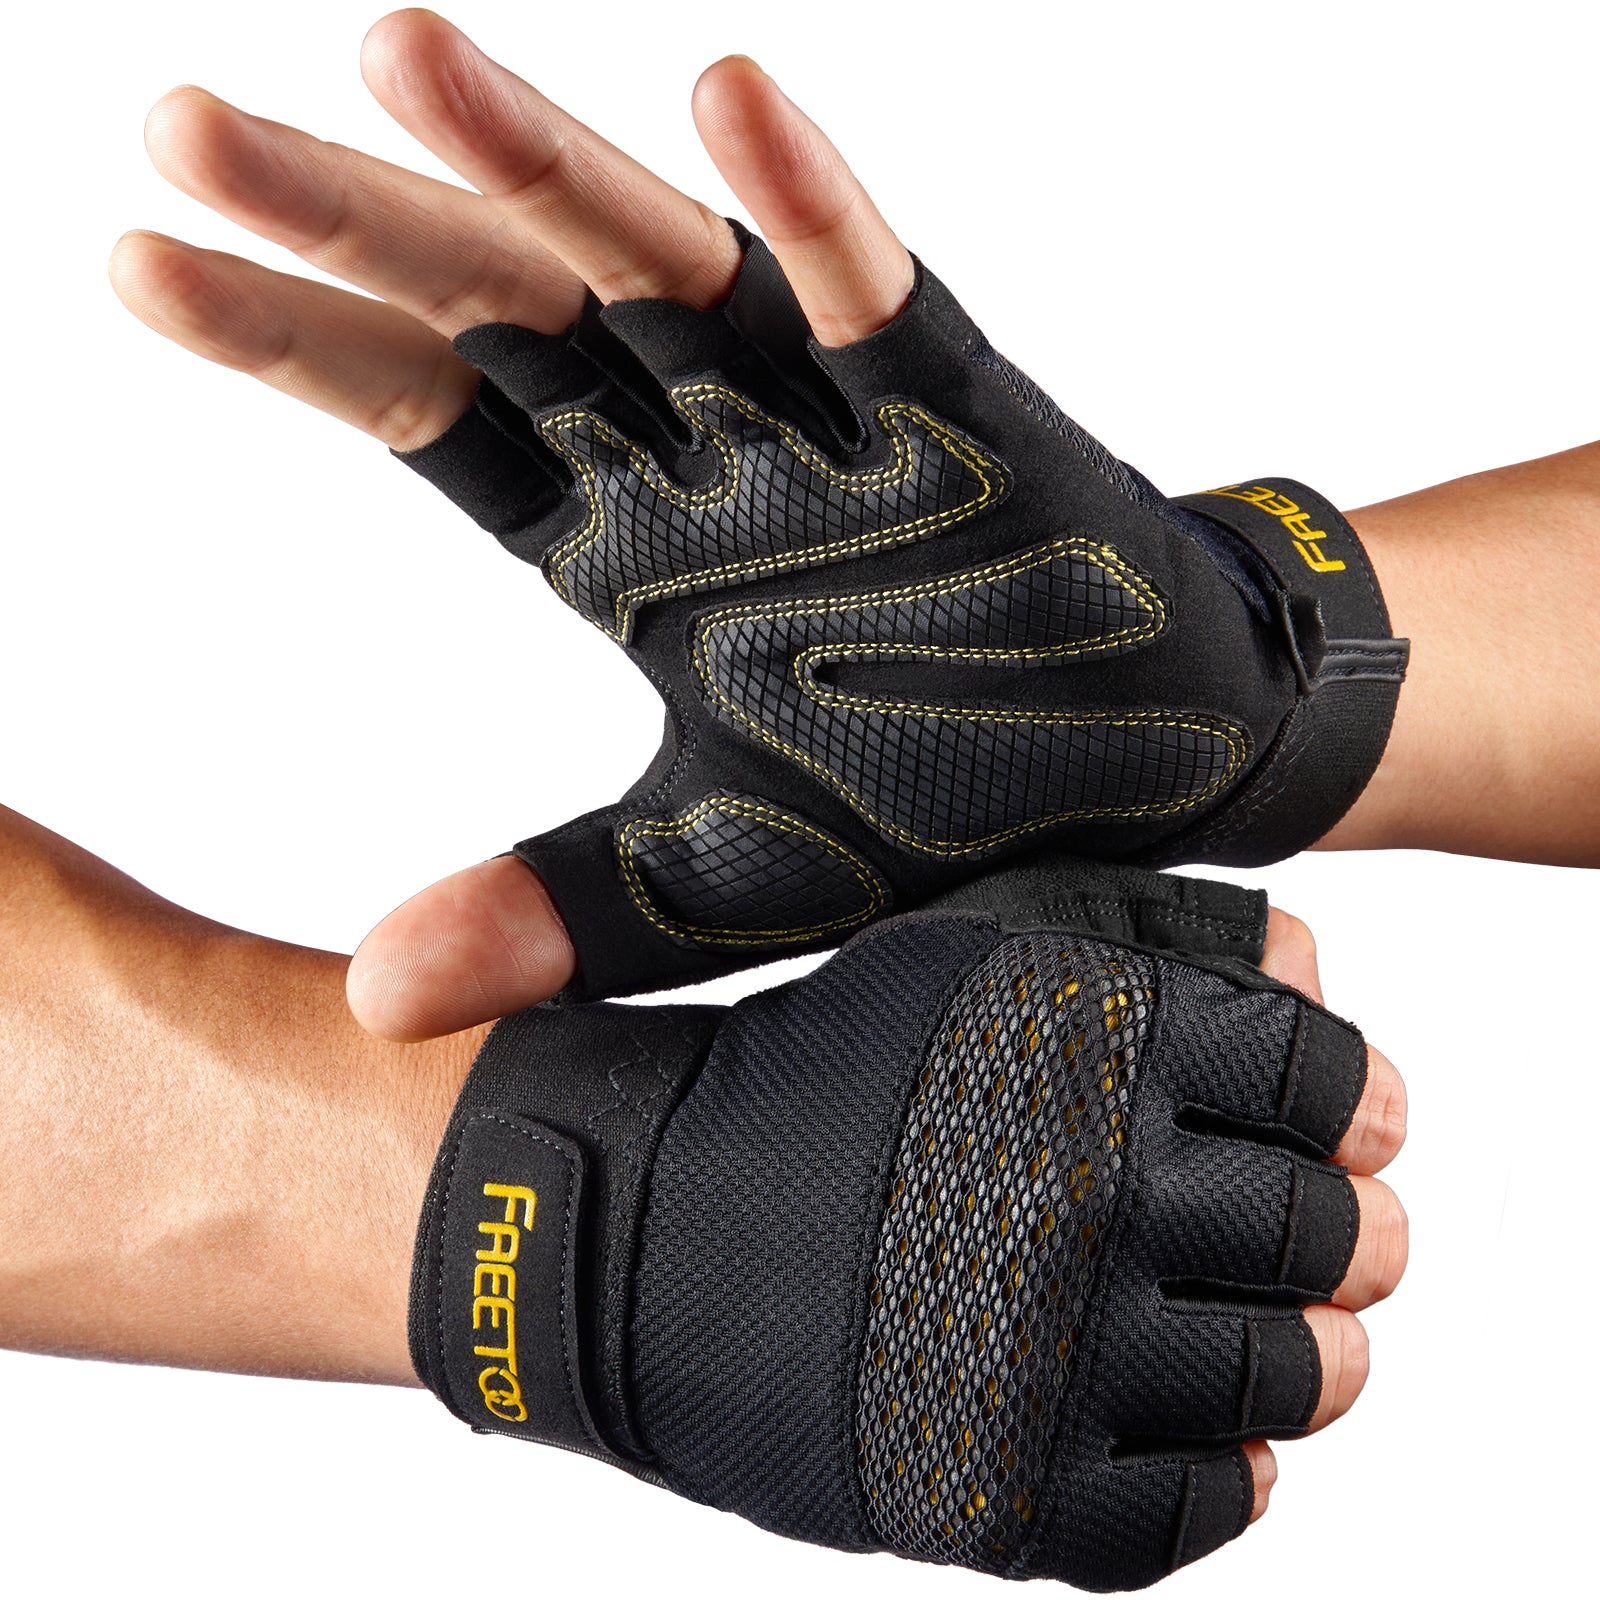 FREETOO® Gym Gloves [Full Palm Protection] with Cushion Pads and Silicone Grip for Men